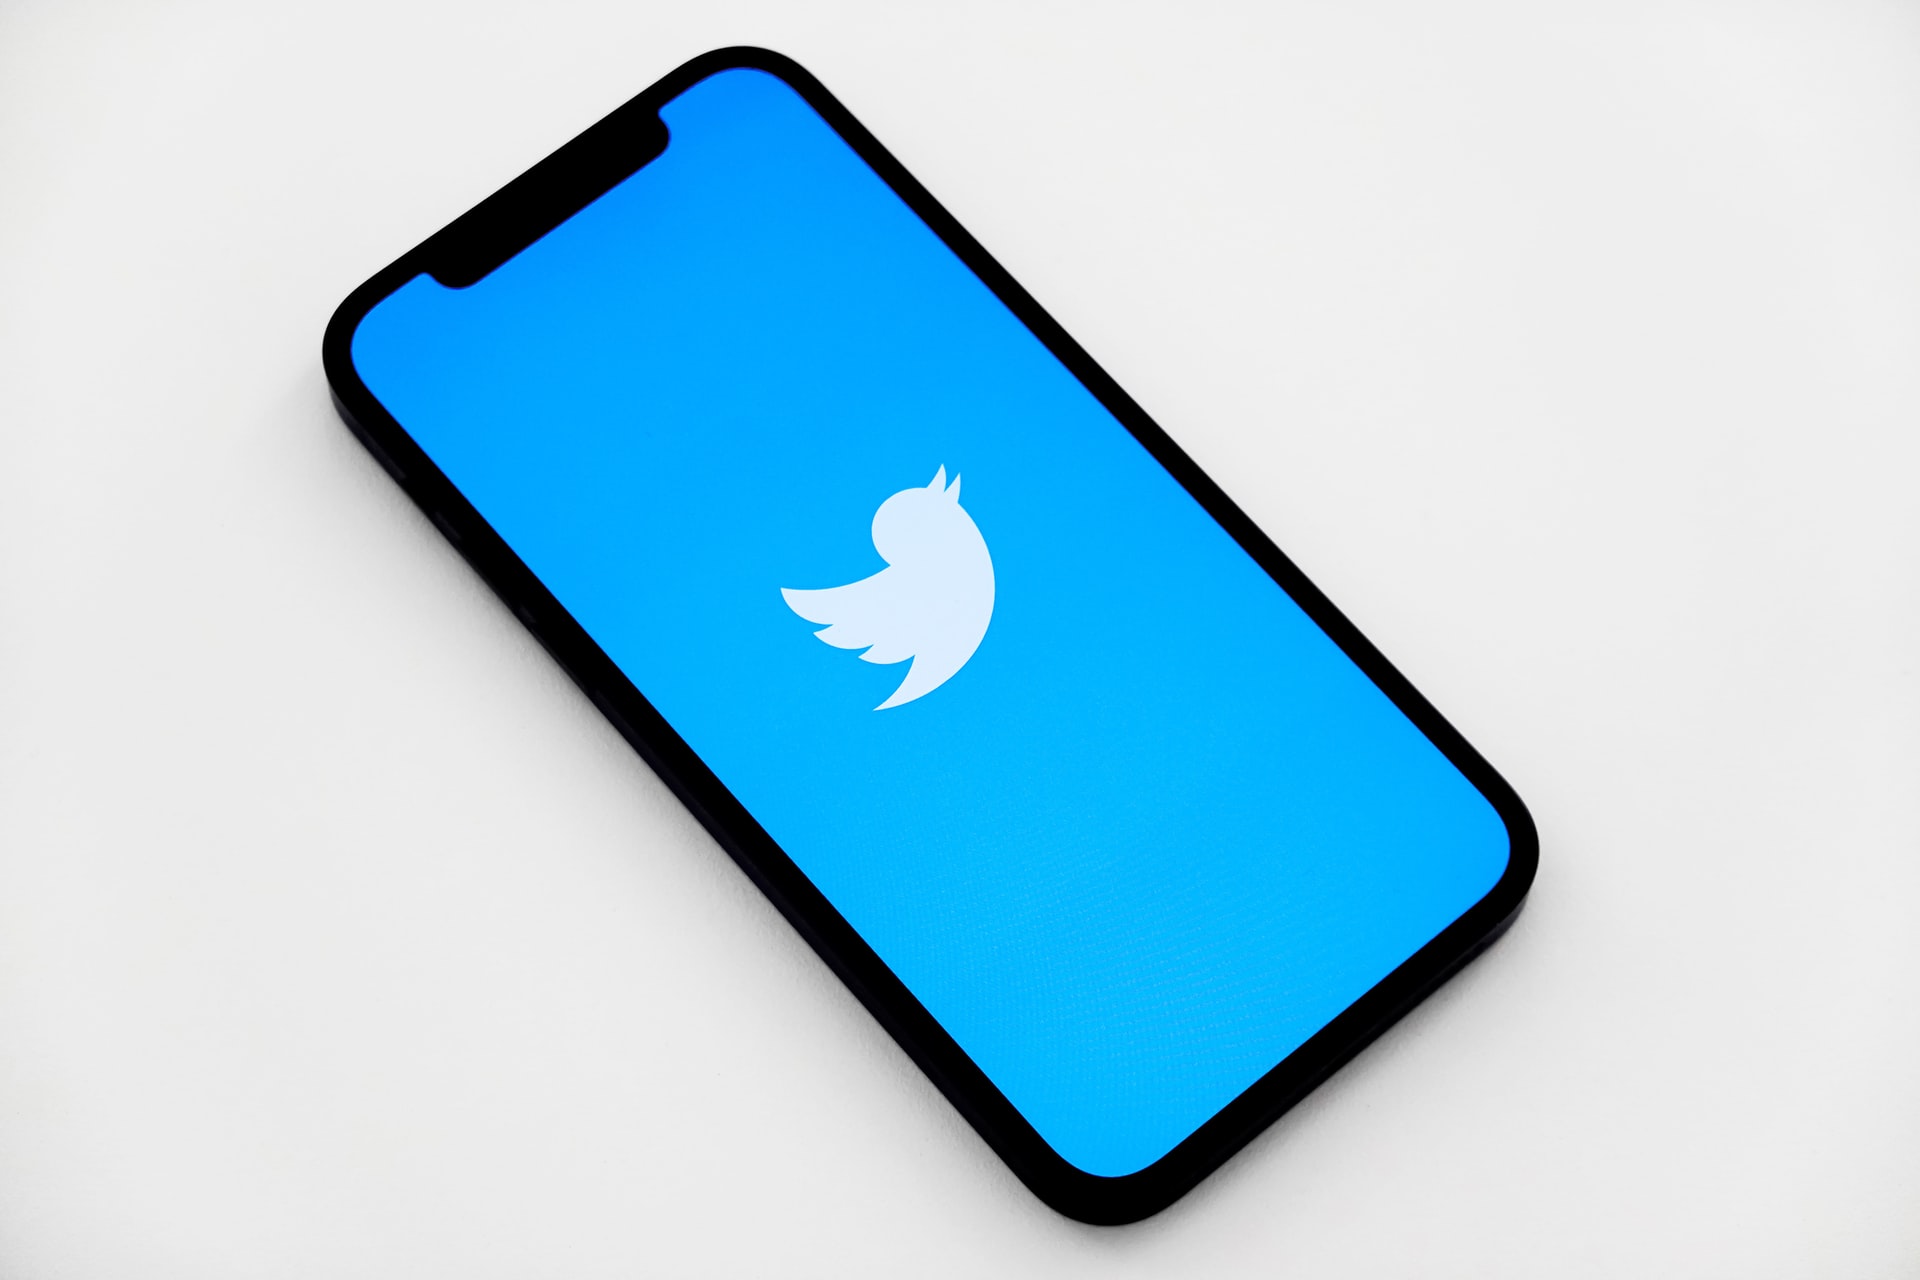 Twitter logo displaying on a phone screen